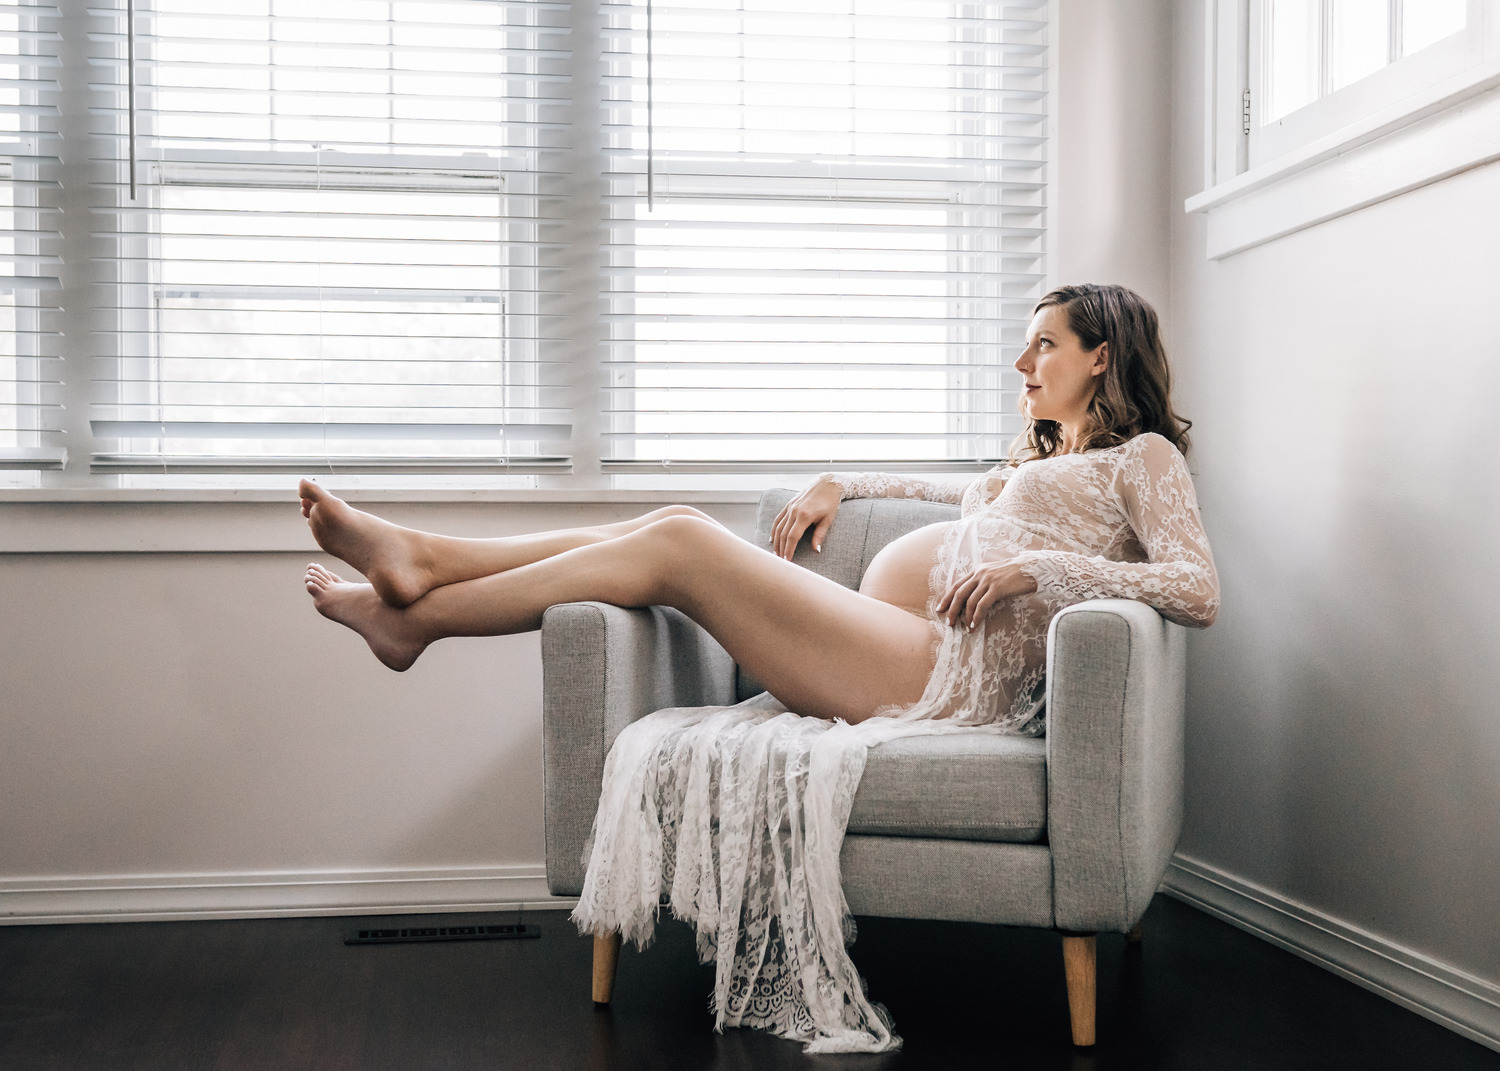 A pregnant woman is lounging in a light gray armchair, with her legs stretched out and resting on the armrest. She is wearing a delicate, lace robe that drapes elegantly over the chair. The room is bright with natural light streaming in through the white blinds, creating a serene and relaxed atmosphere.